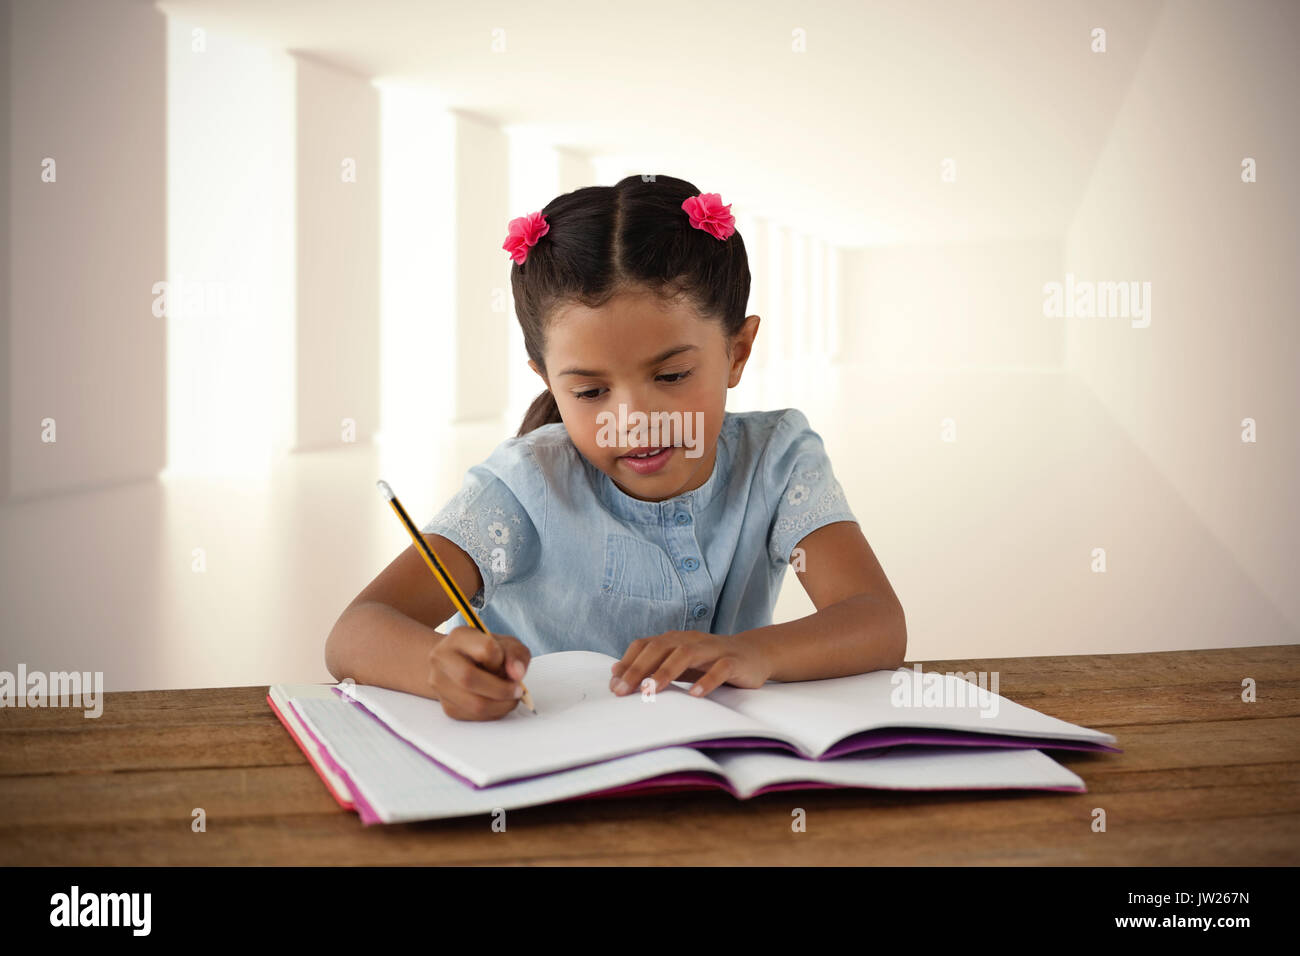 Girl writing in book at desk against digitally generated room Stock Photo